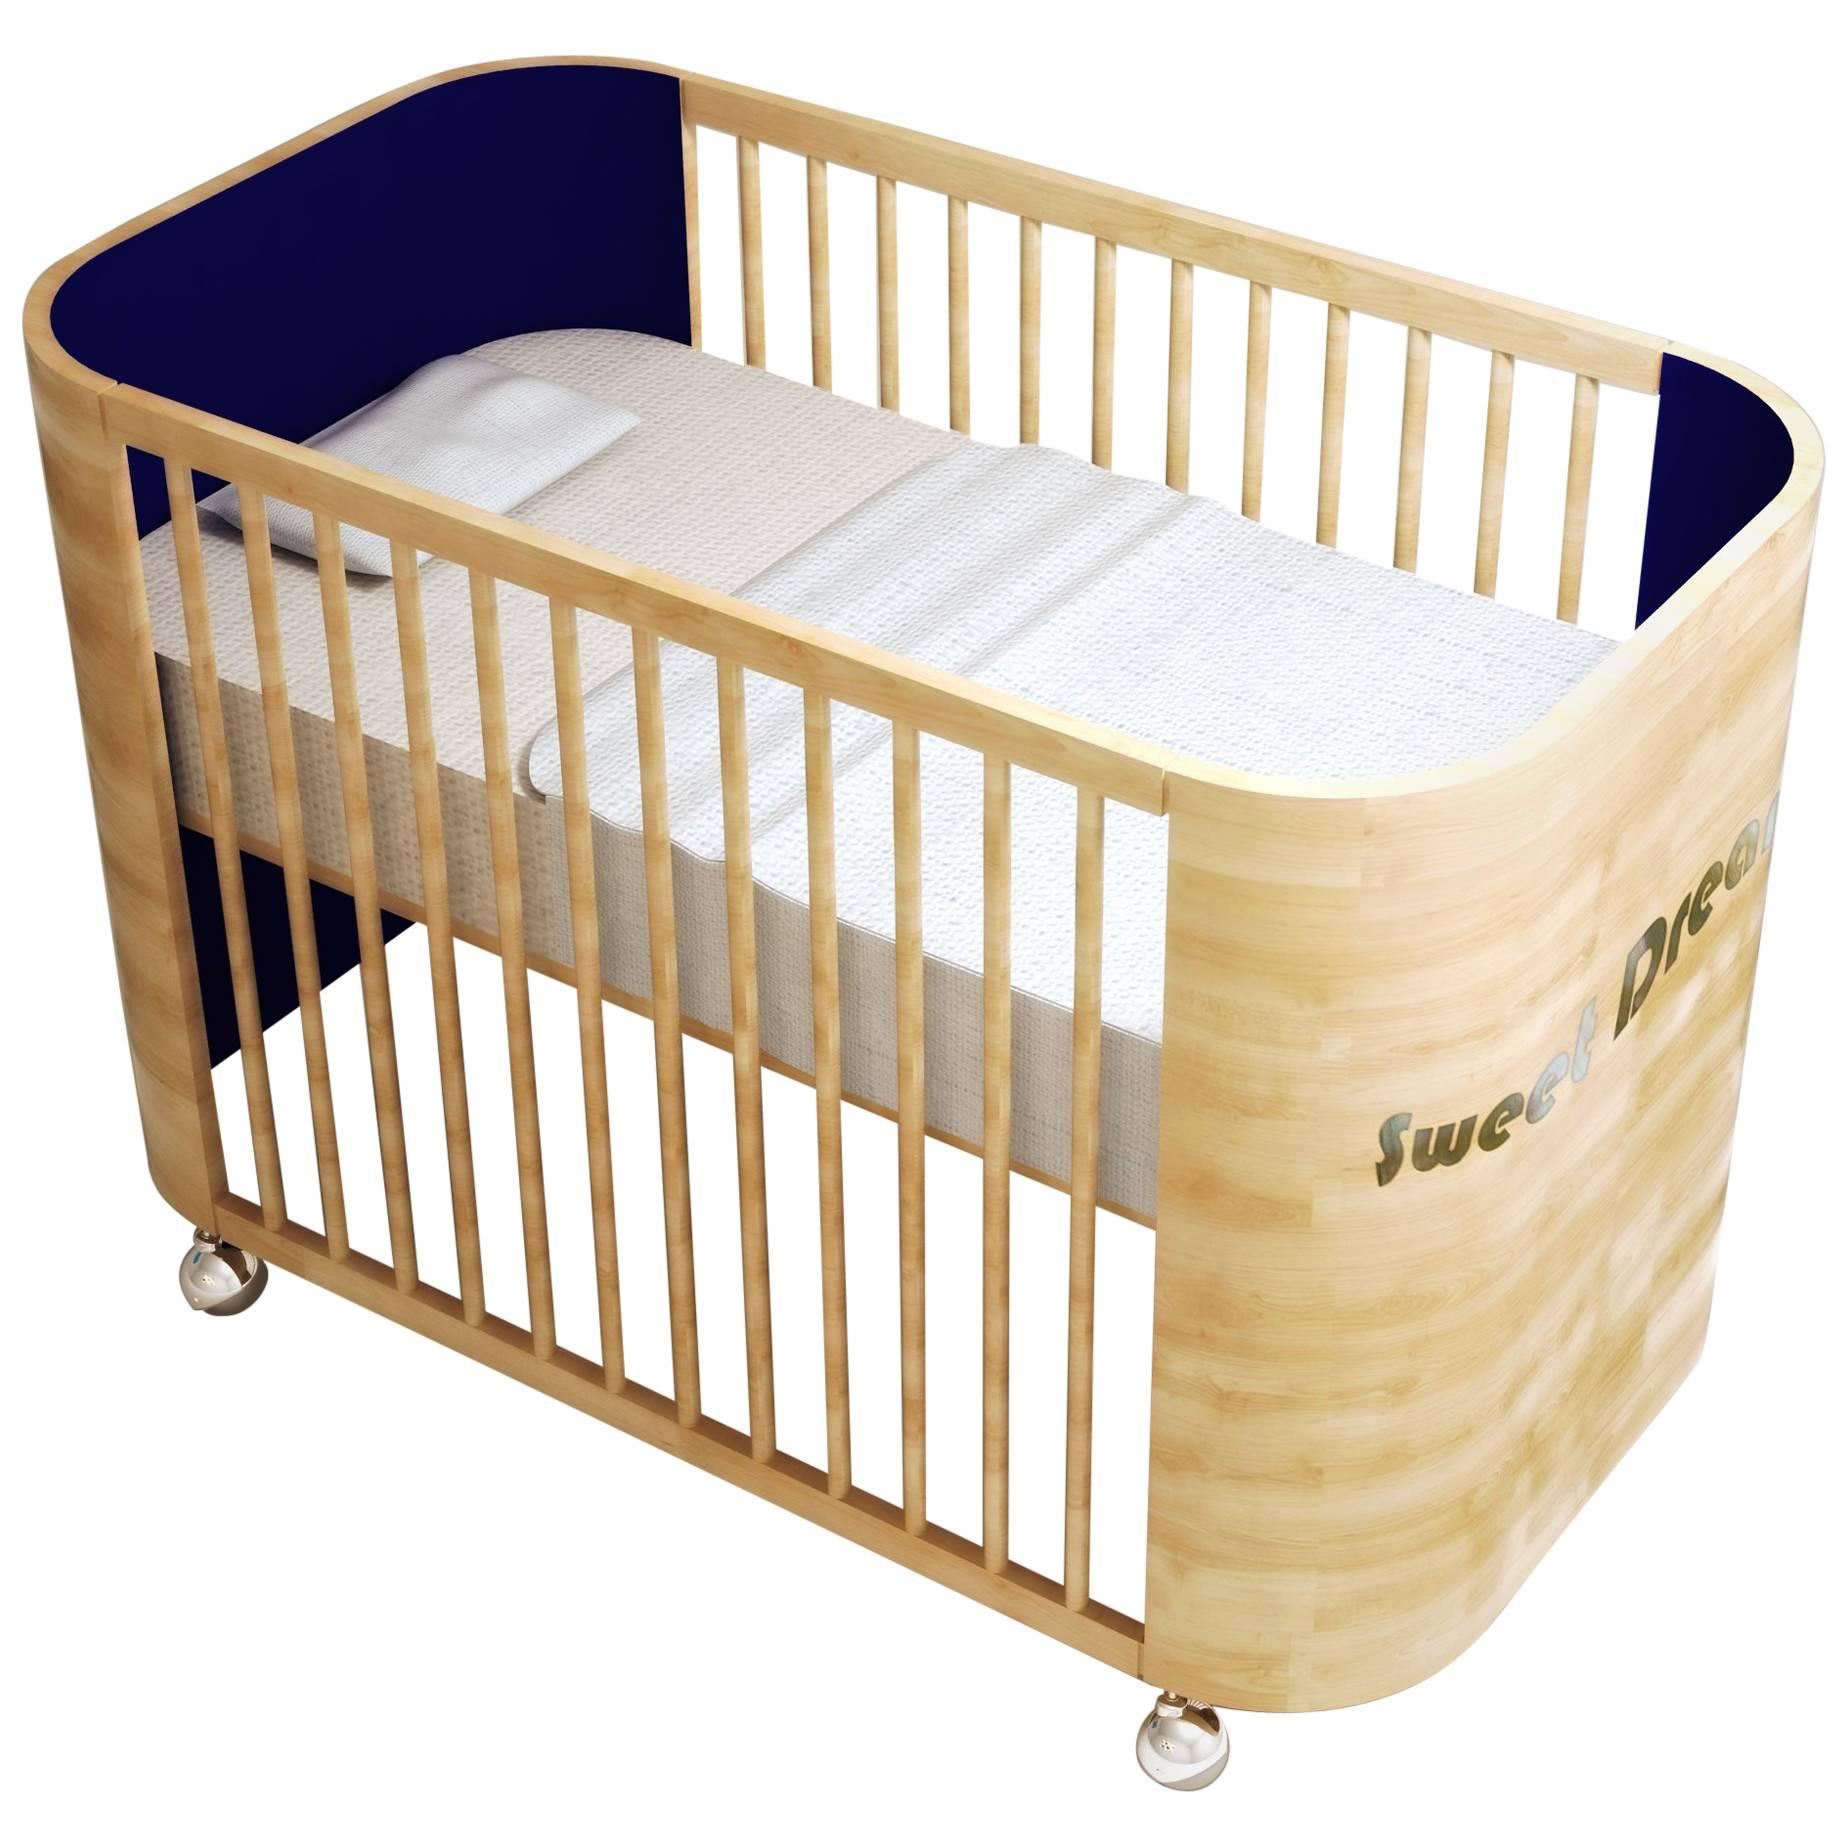 Embrace Dreams Crib in Beech Wood and Navy Blue by Misk Nursery For Sale